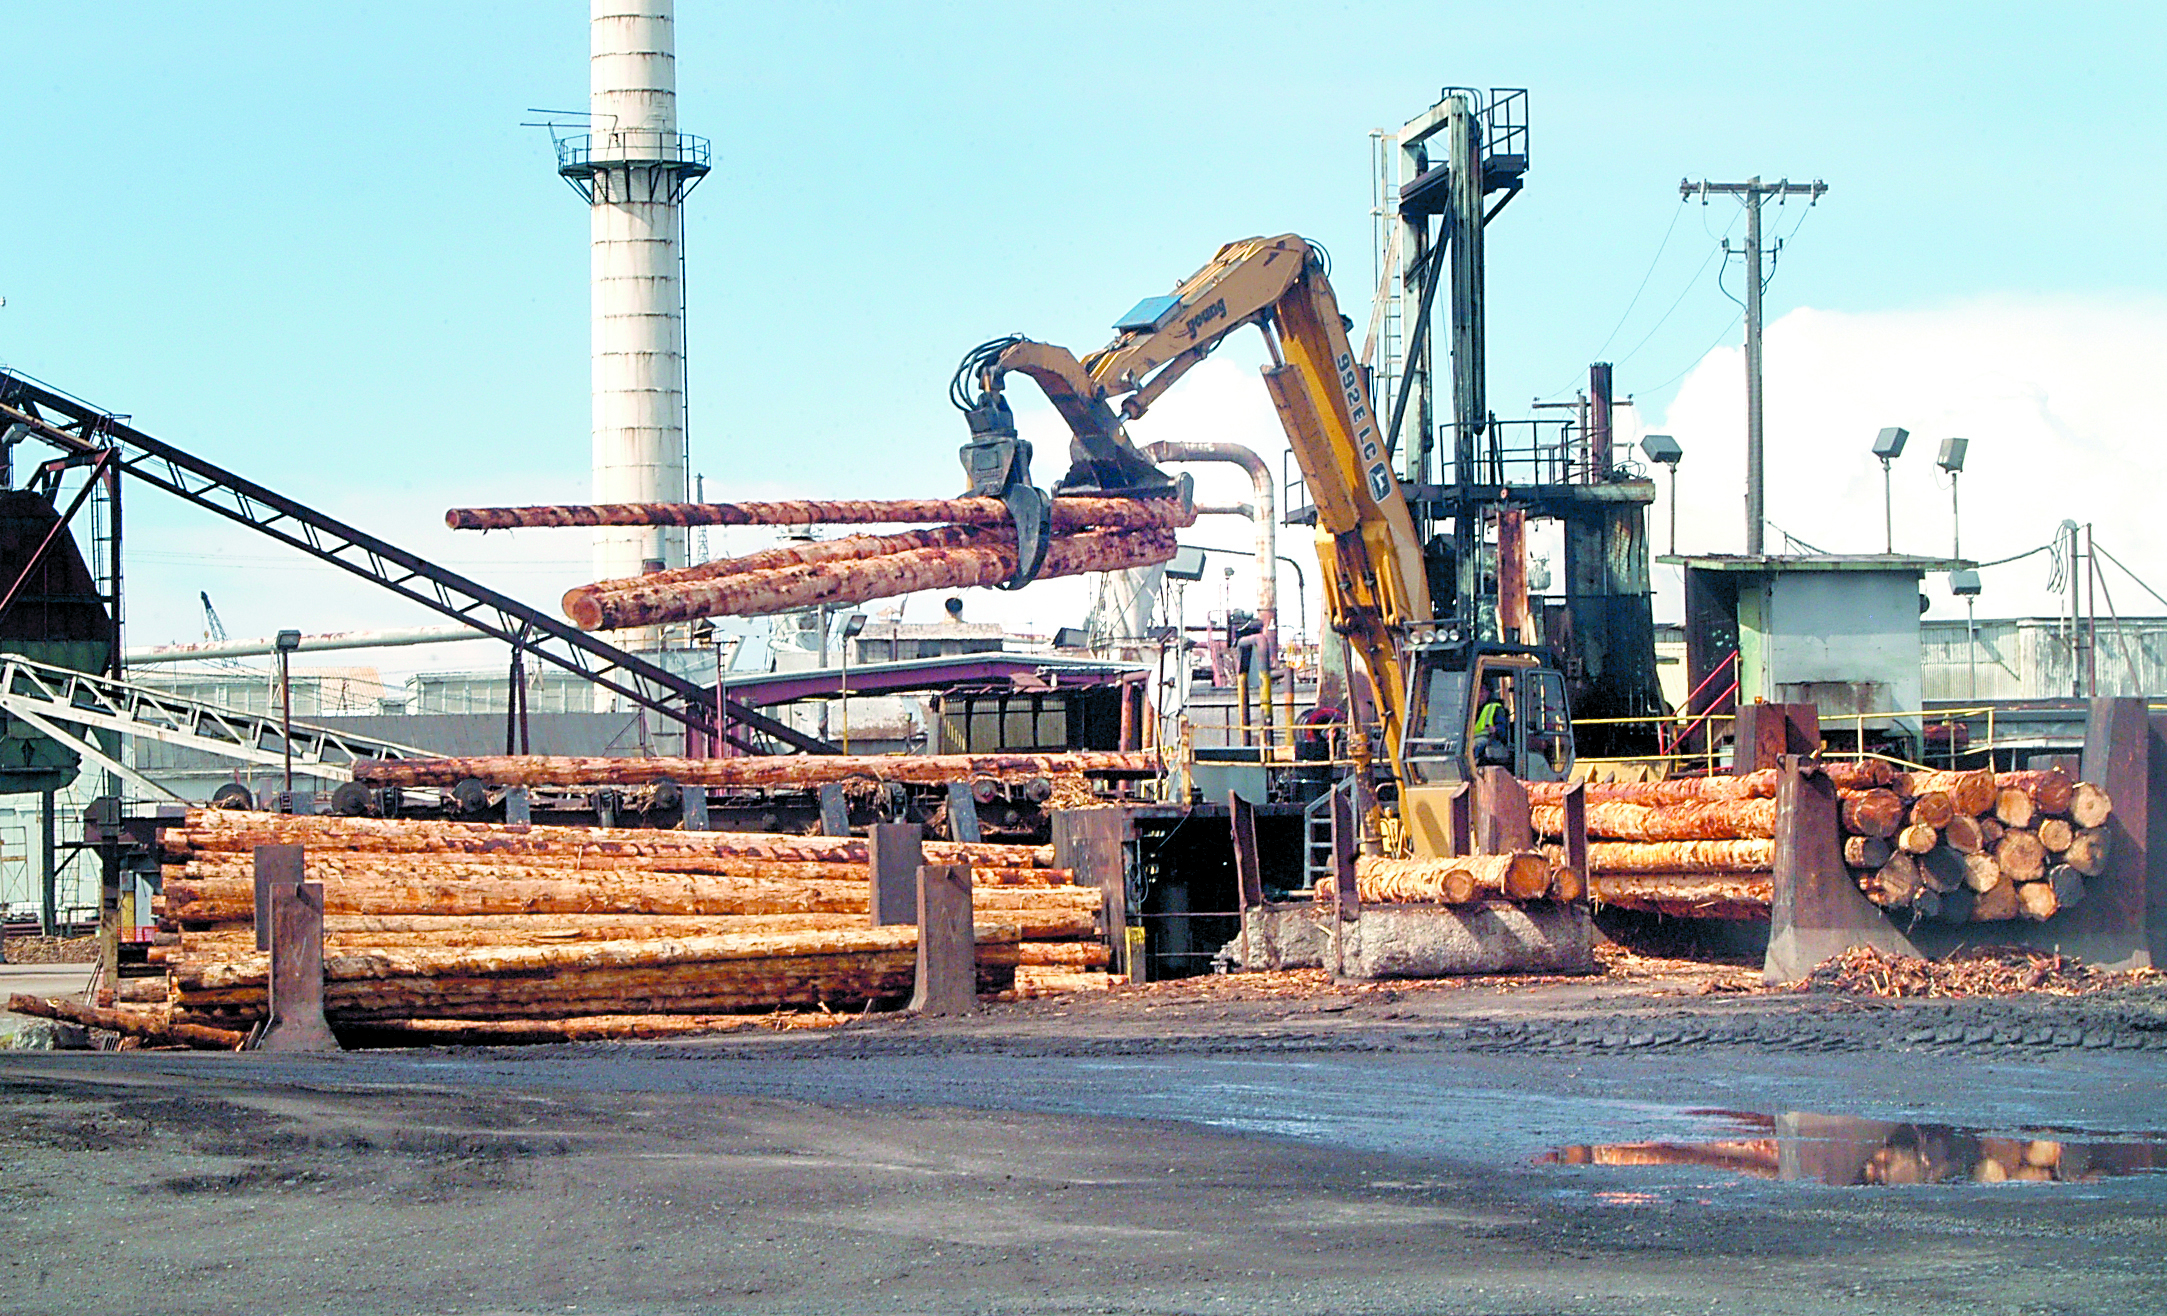 A loader moves logs from a debarker at the Peninsula Plywood mill in Port Angeles last week. The logs are being prepared for export. Keith Thorpe/Peninsula Daily News